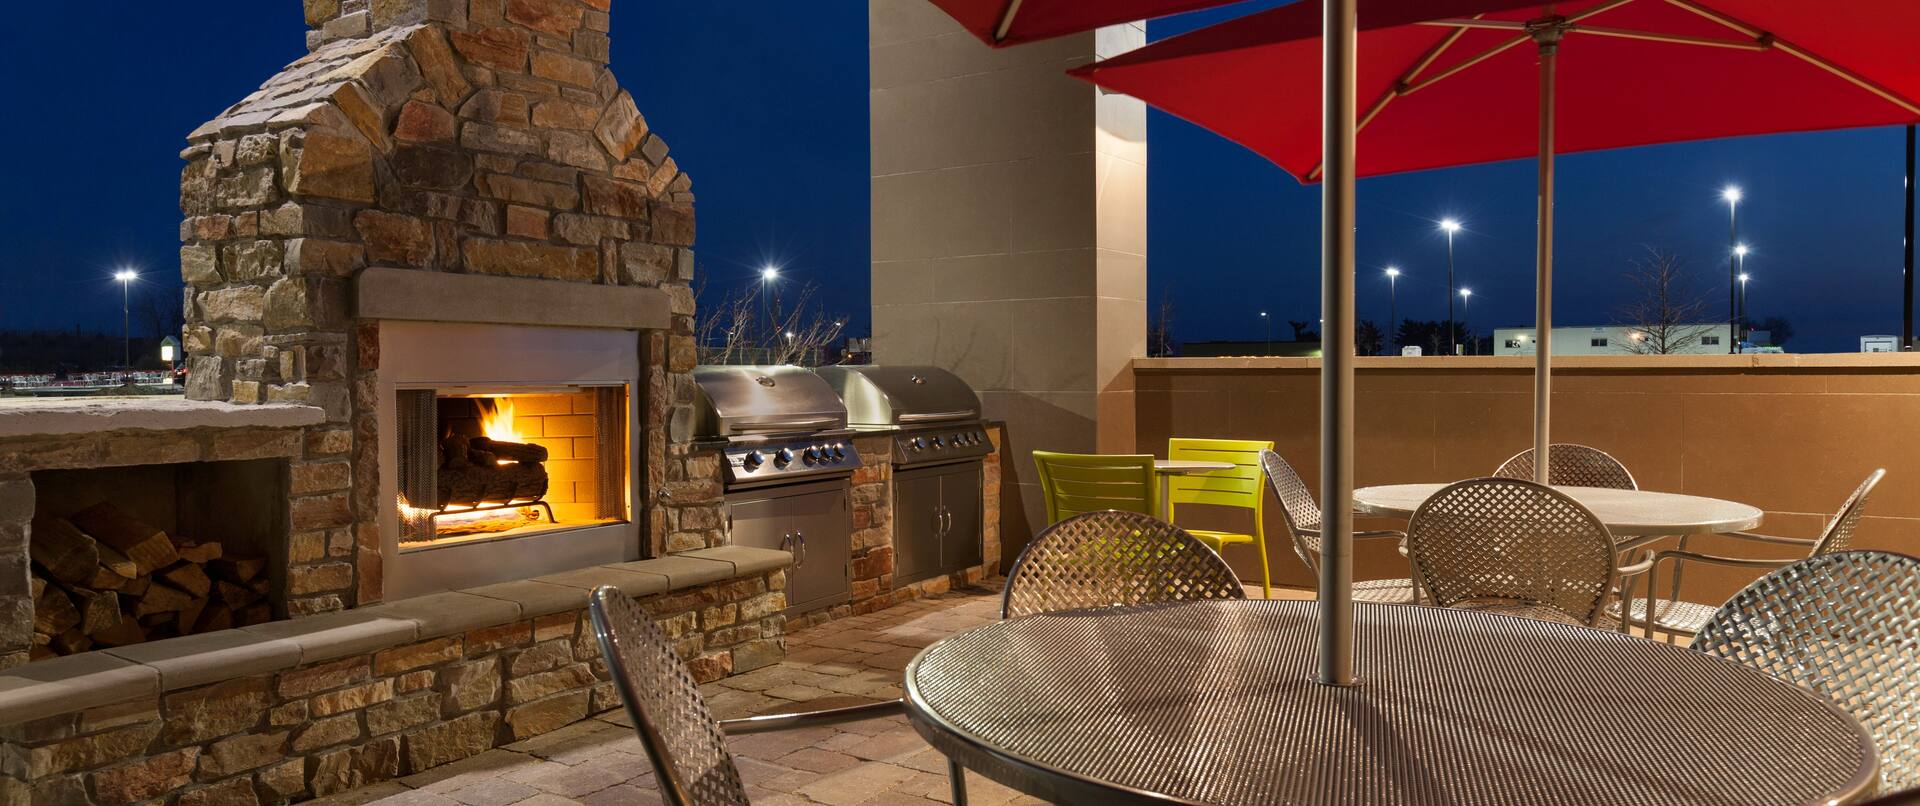 Outdoor Patio With Grill